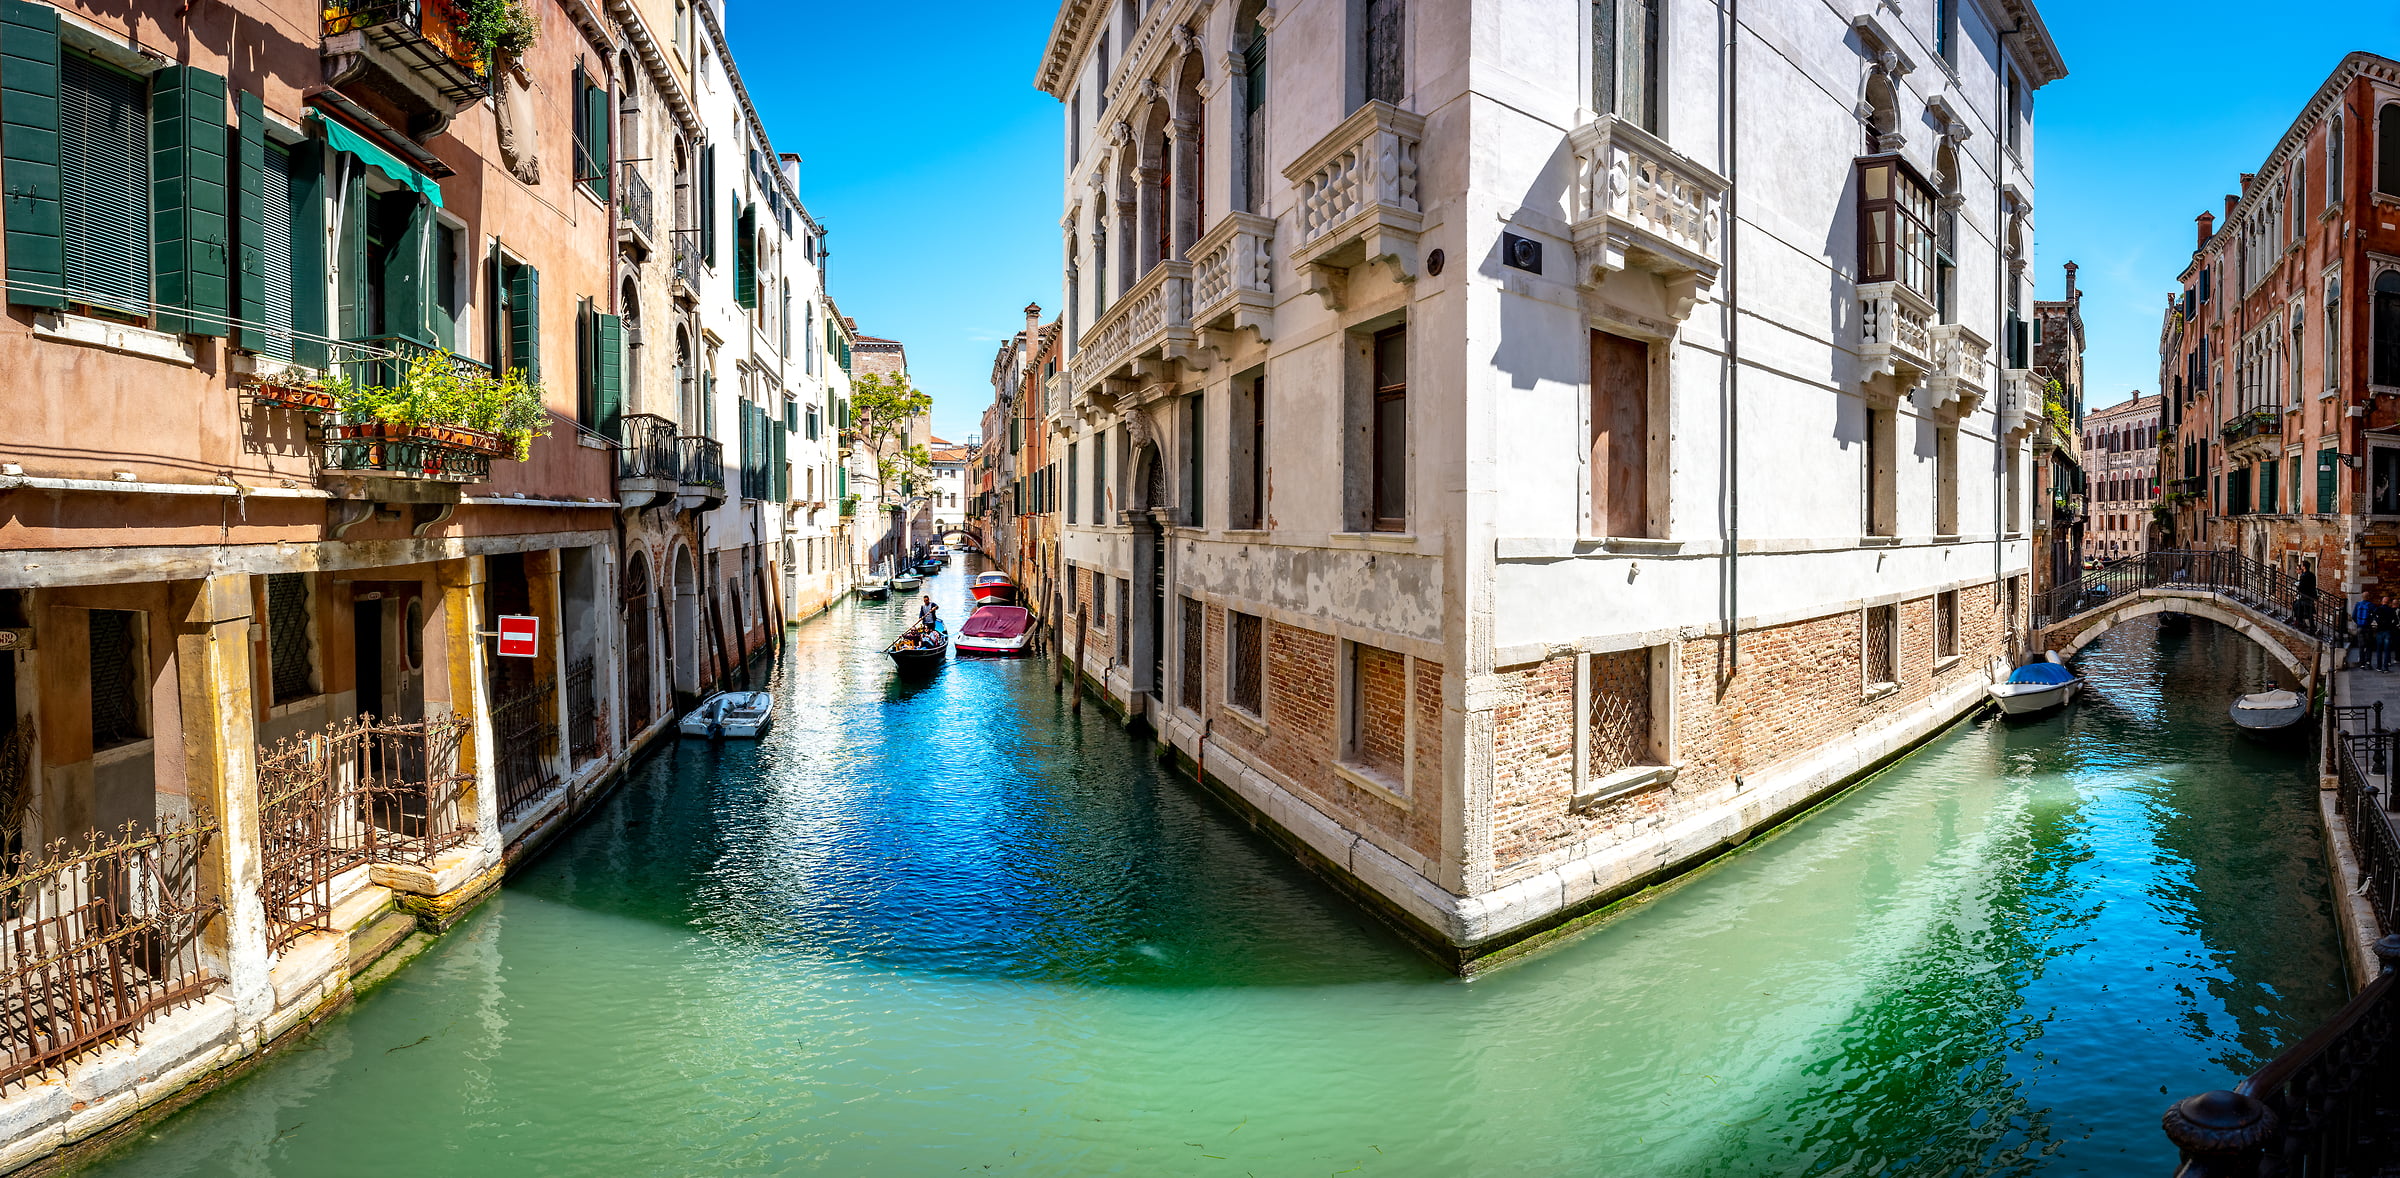 102 megapixels! A very high resolution, large-format VAST photo print of the Venice canals; photograph created by Justin Katz in Rio Della Telta, Venice, Italy.